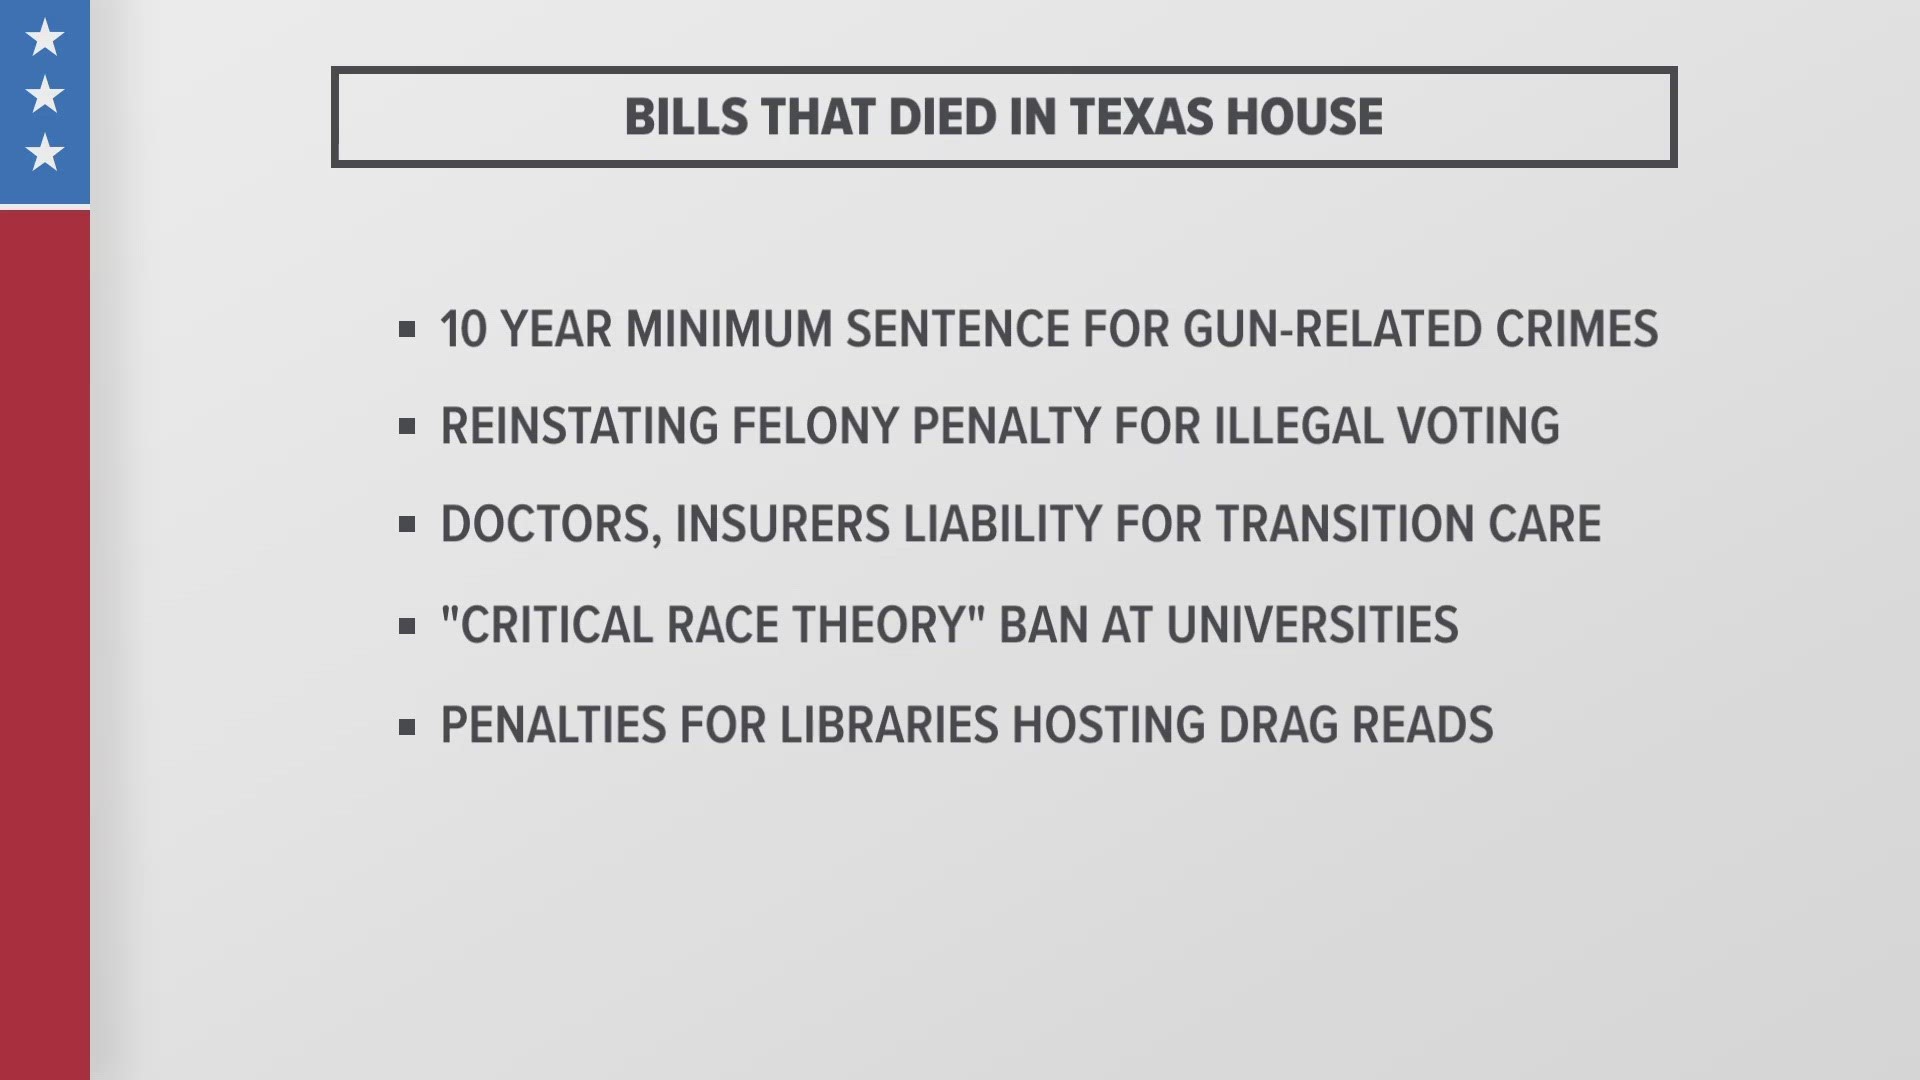 The House took the weekend off, meaning many bills died before making it through committee.